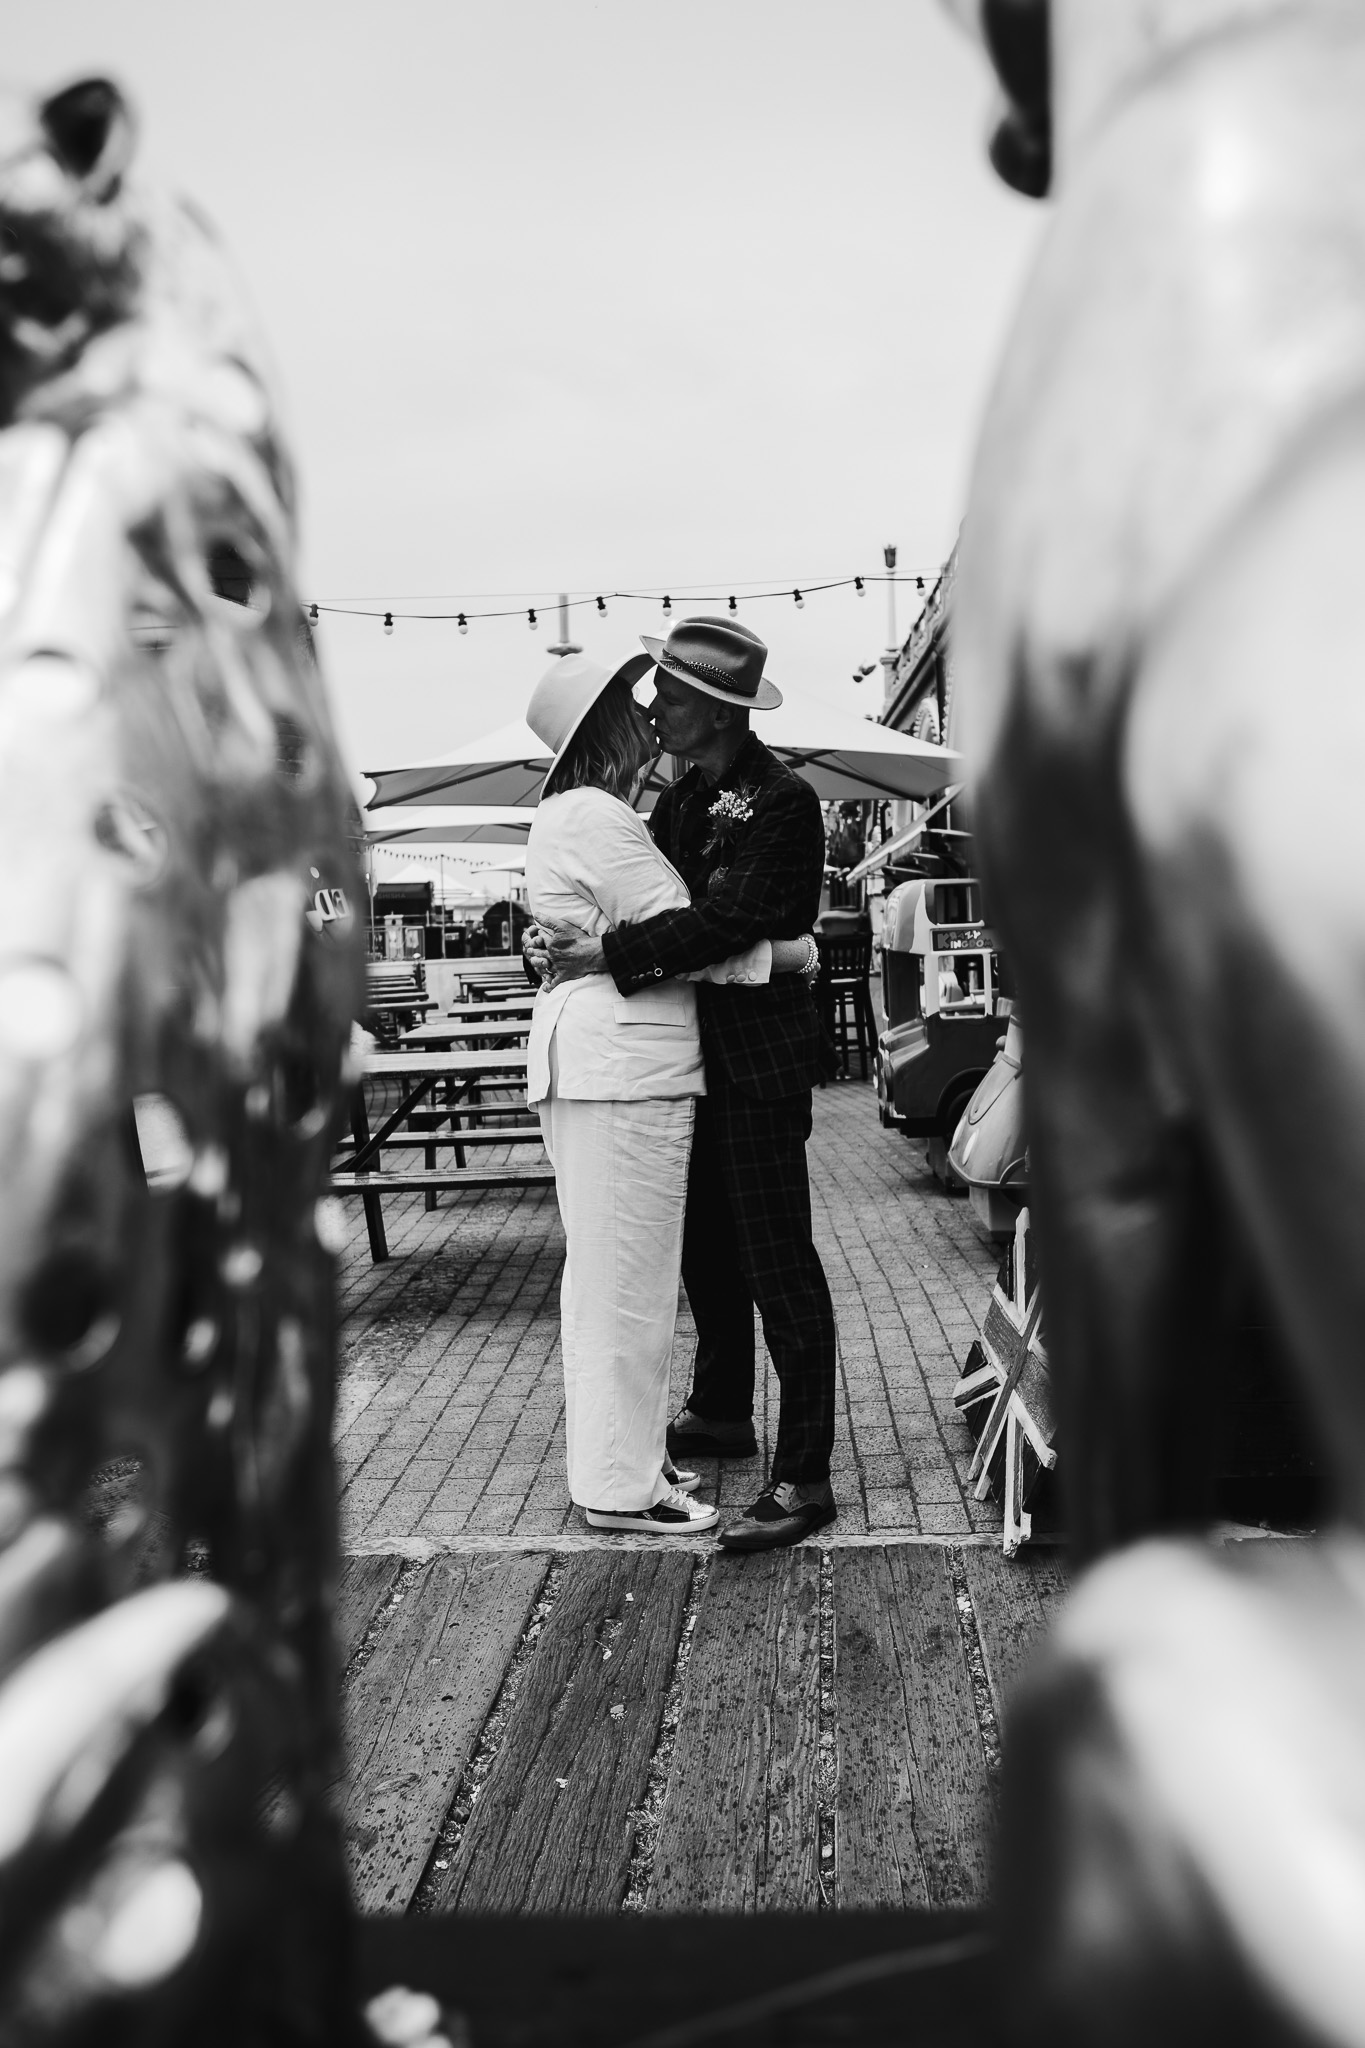 A shot through shop trinkets of Mary and Mike embracing during a wedding couple portrait session near Brighton beach.